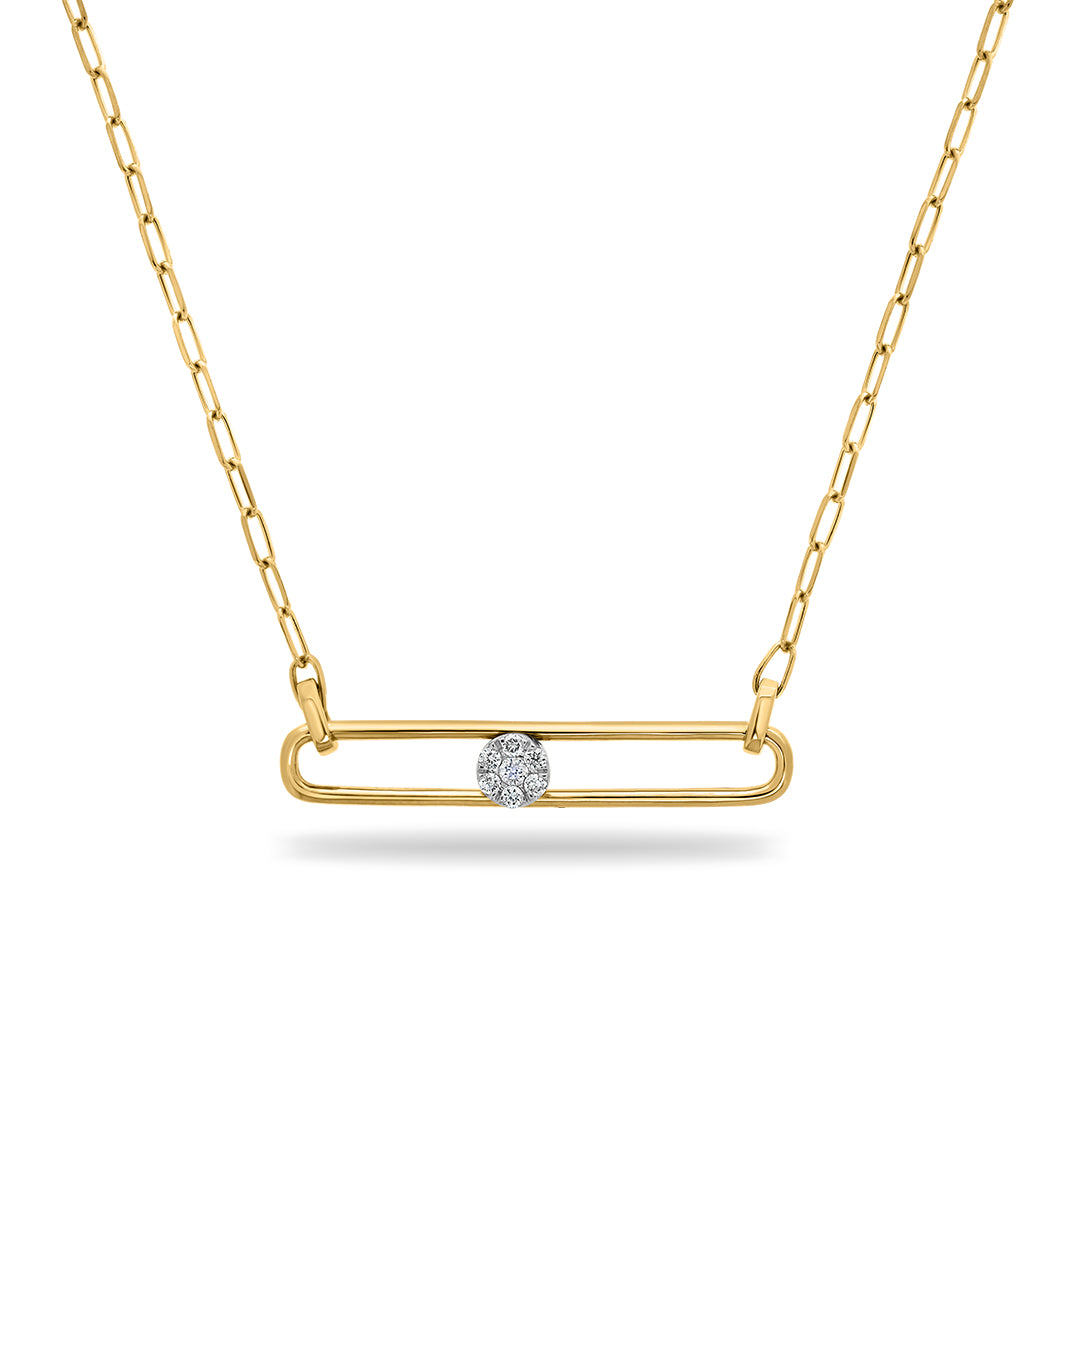 Wes Moving Diamond Necklace